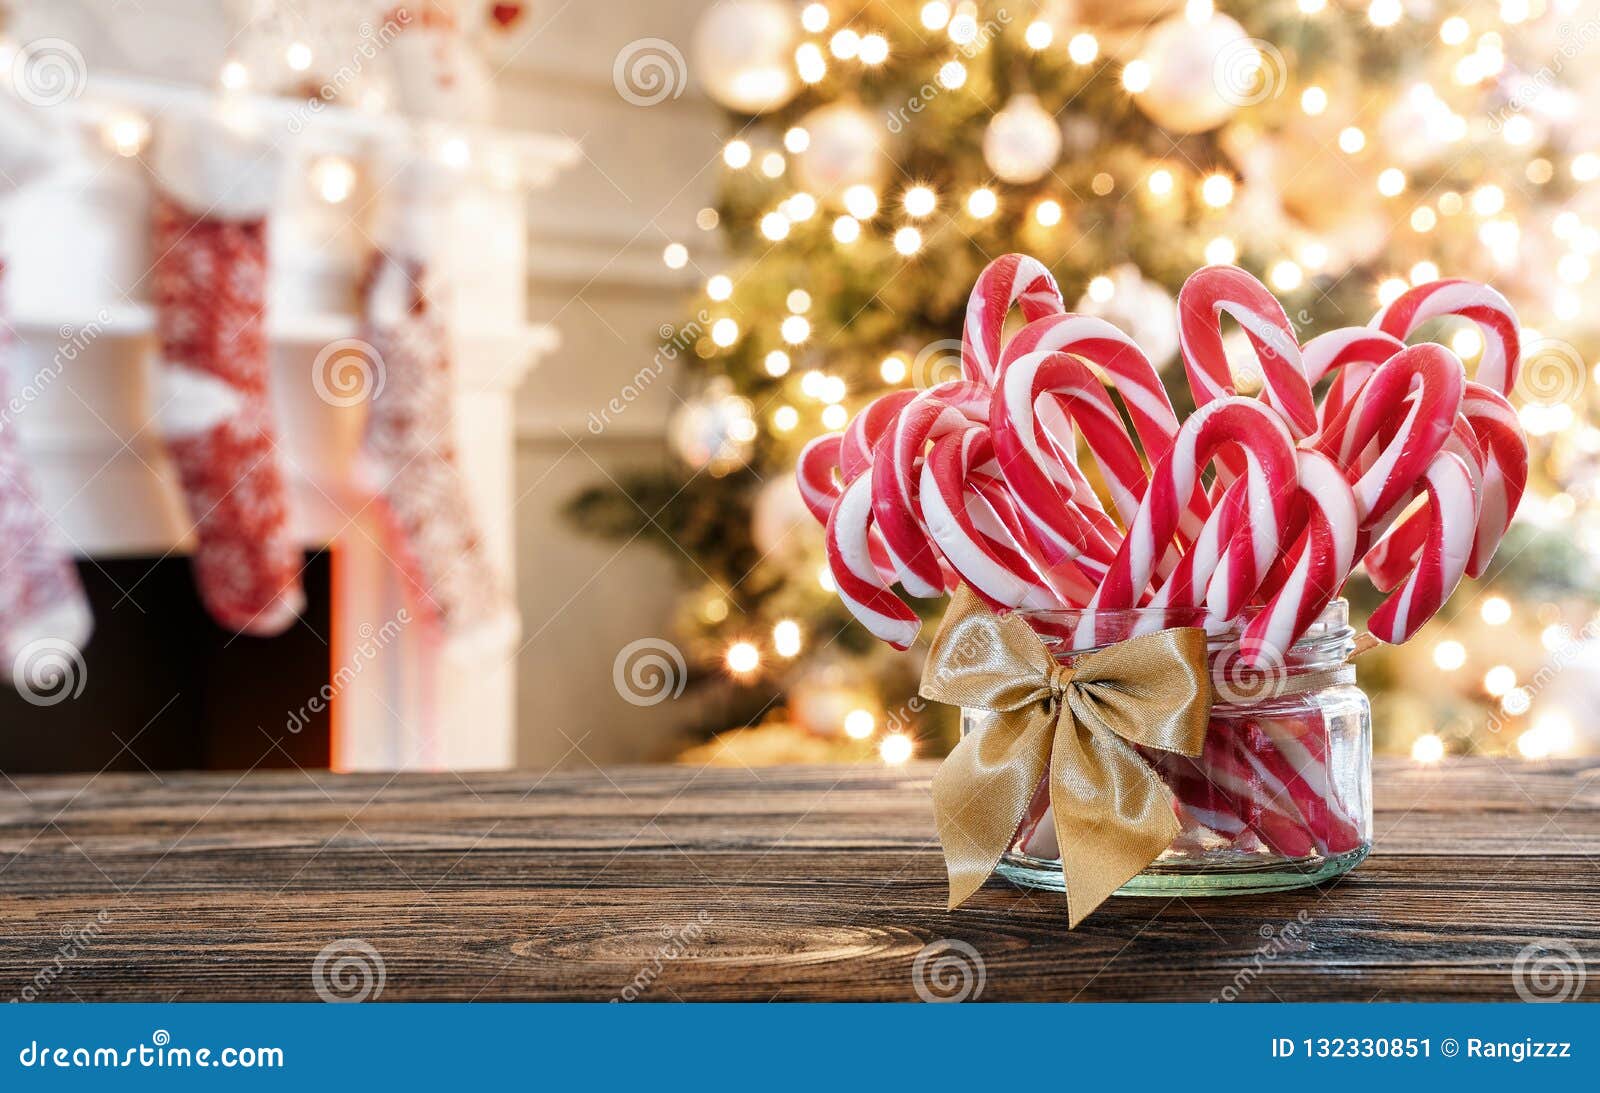 Candy Canes on the Christmas Table Stock Image - Image of lights ...